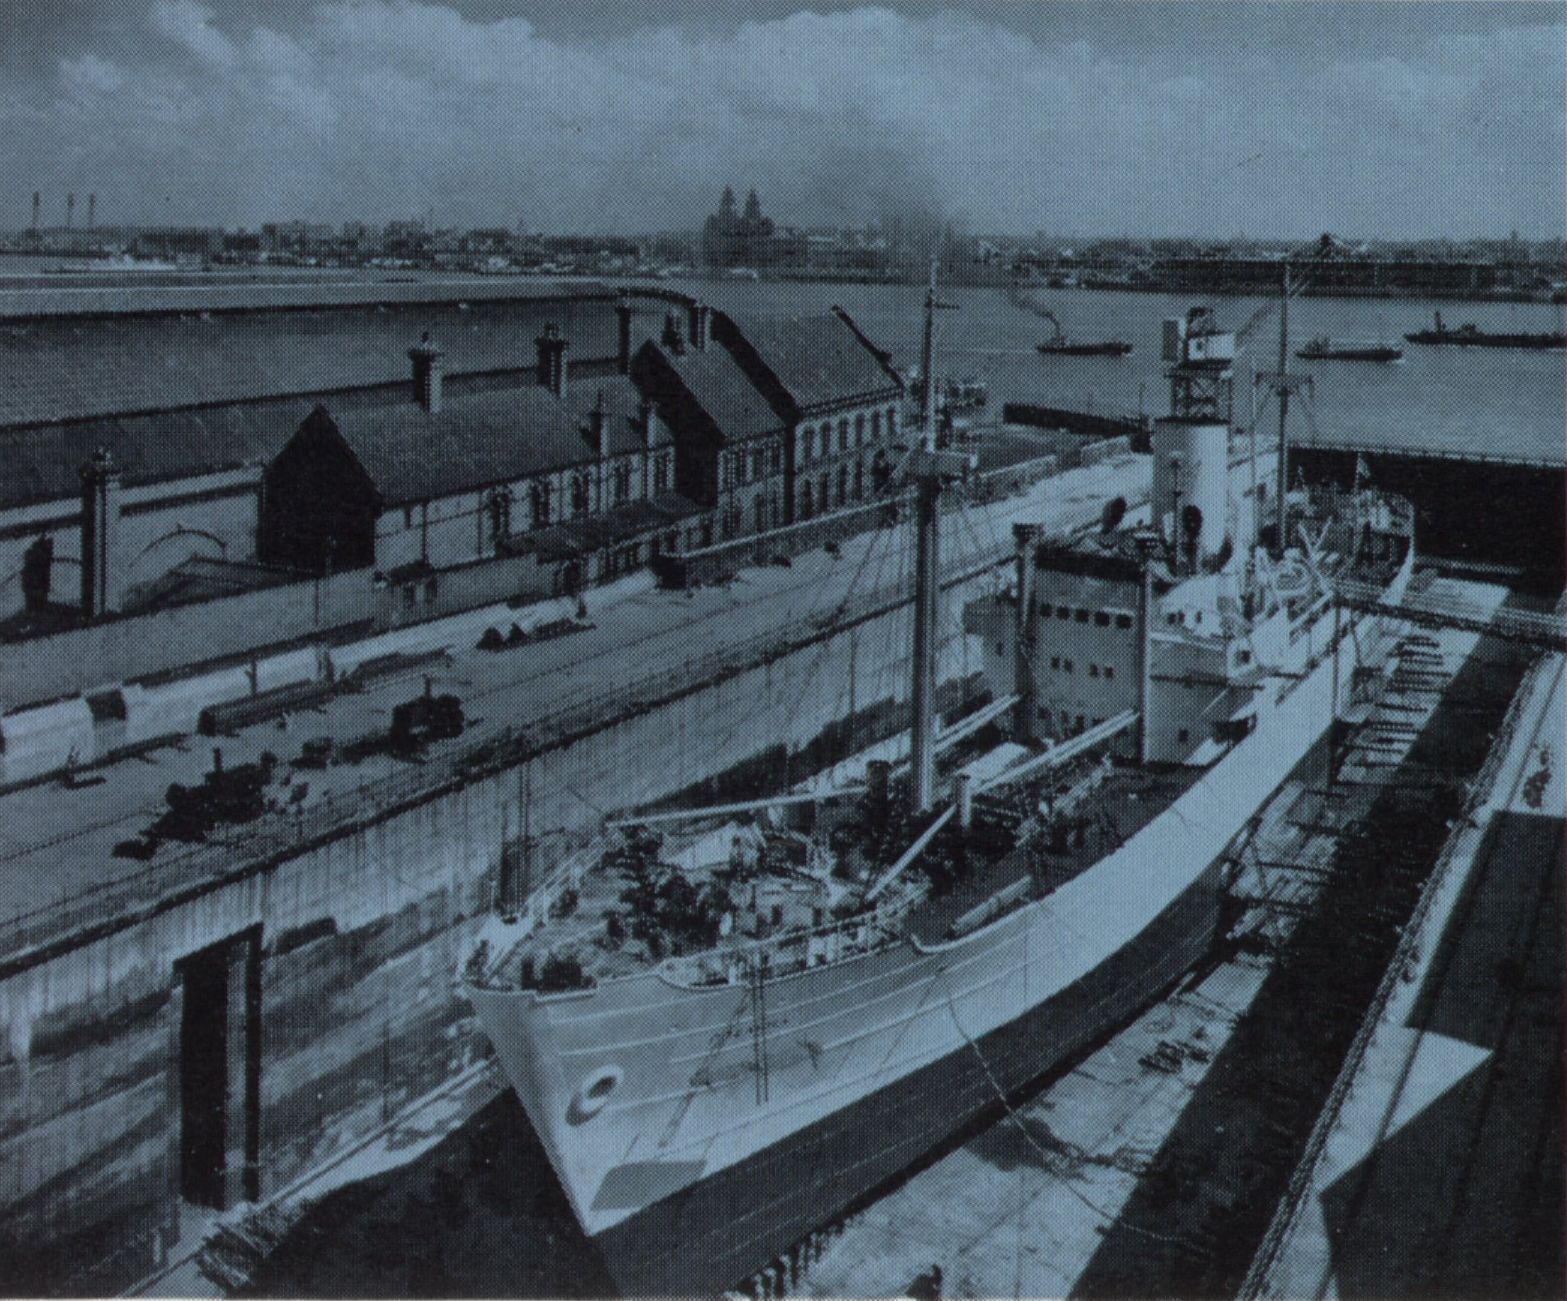 this is an old picture of a factory and buildings